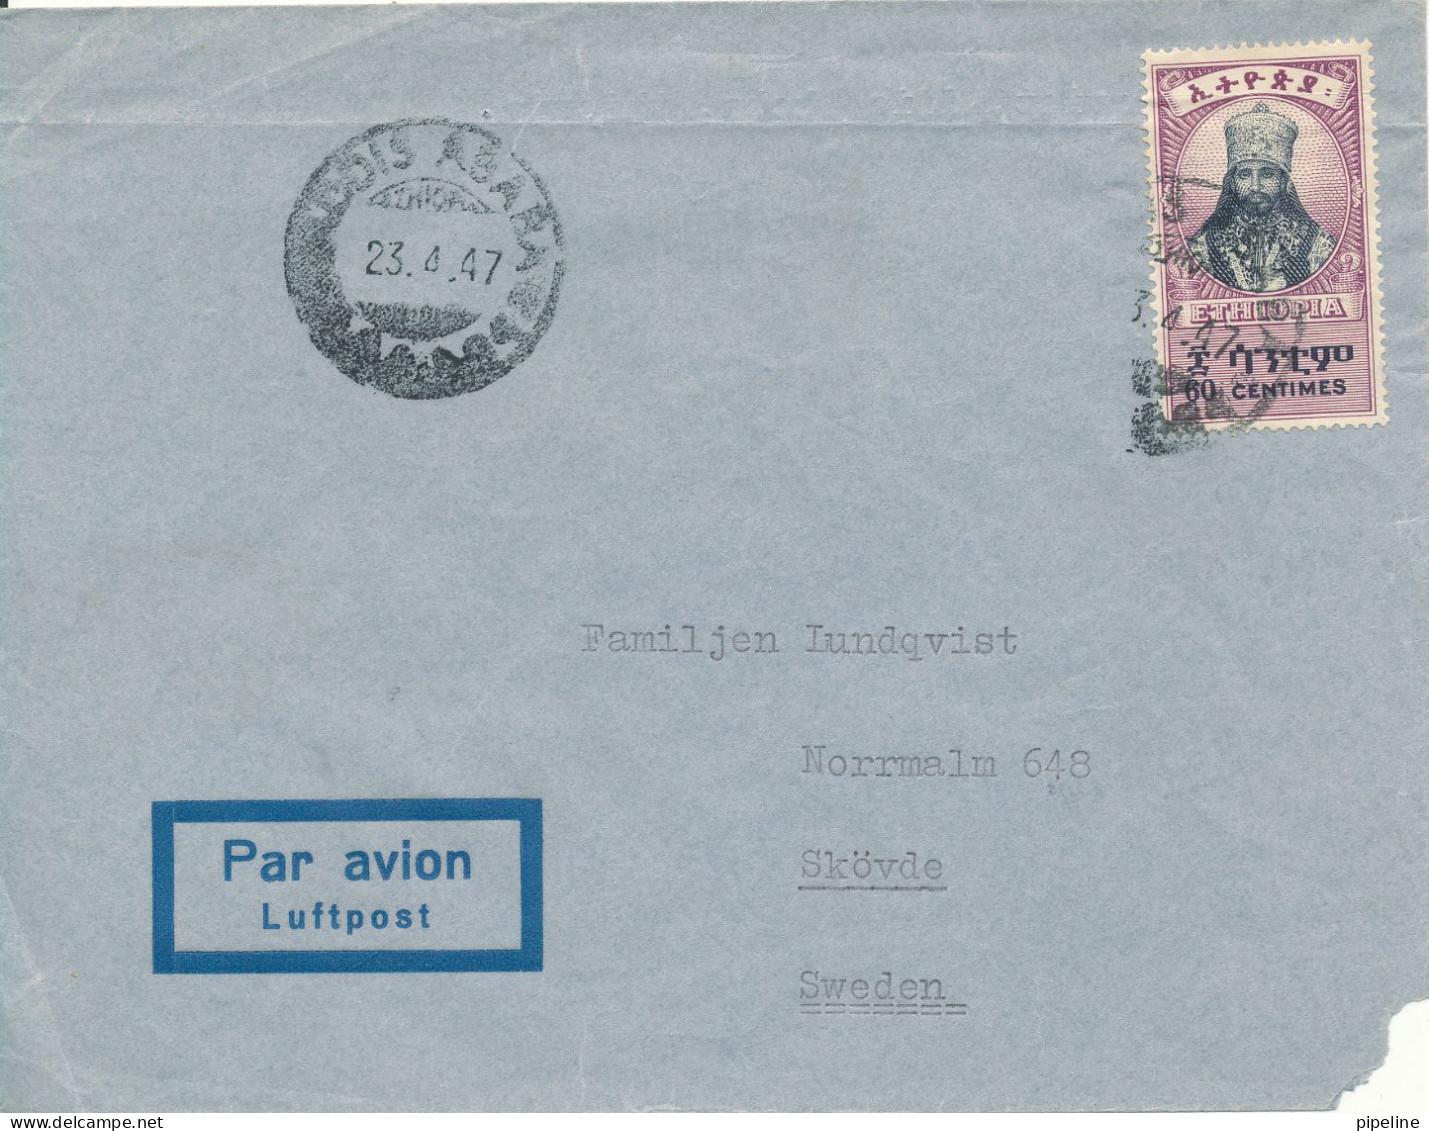 Ethiopia Cover Sent Air Mail To Denmark 23-4-1947 Single Franked The Cover Is Missing The Lower Right Corner - Ethiopia